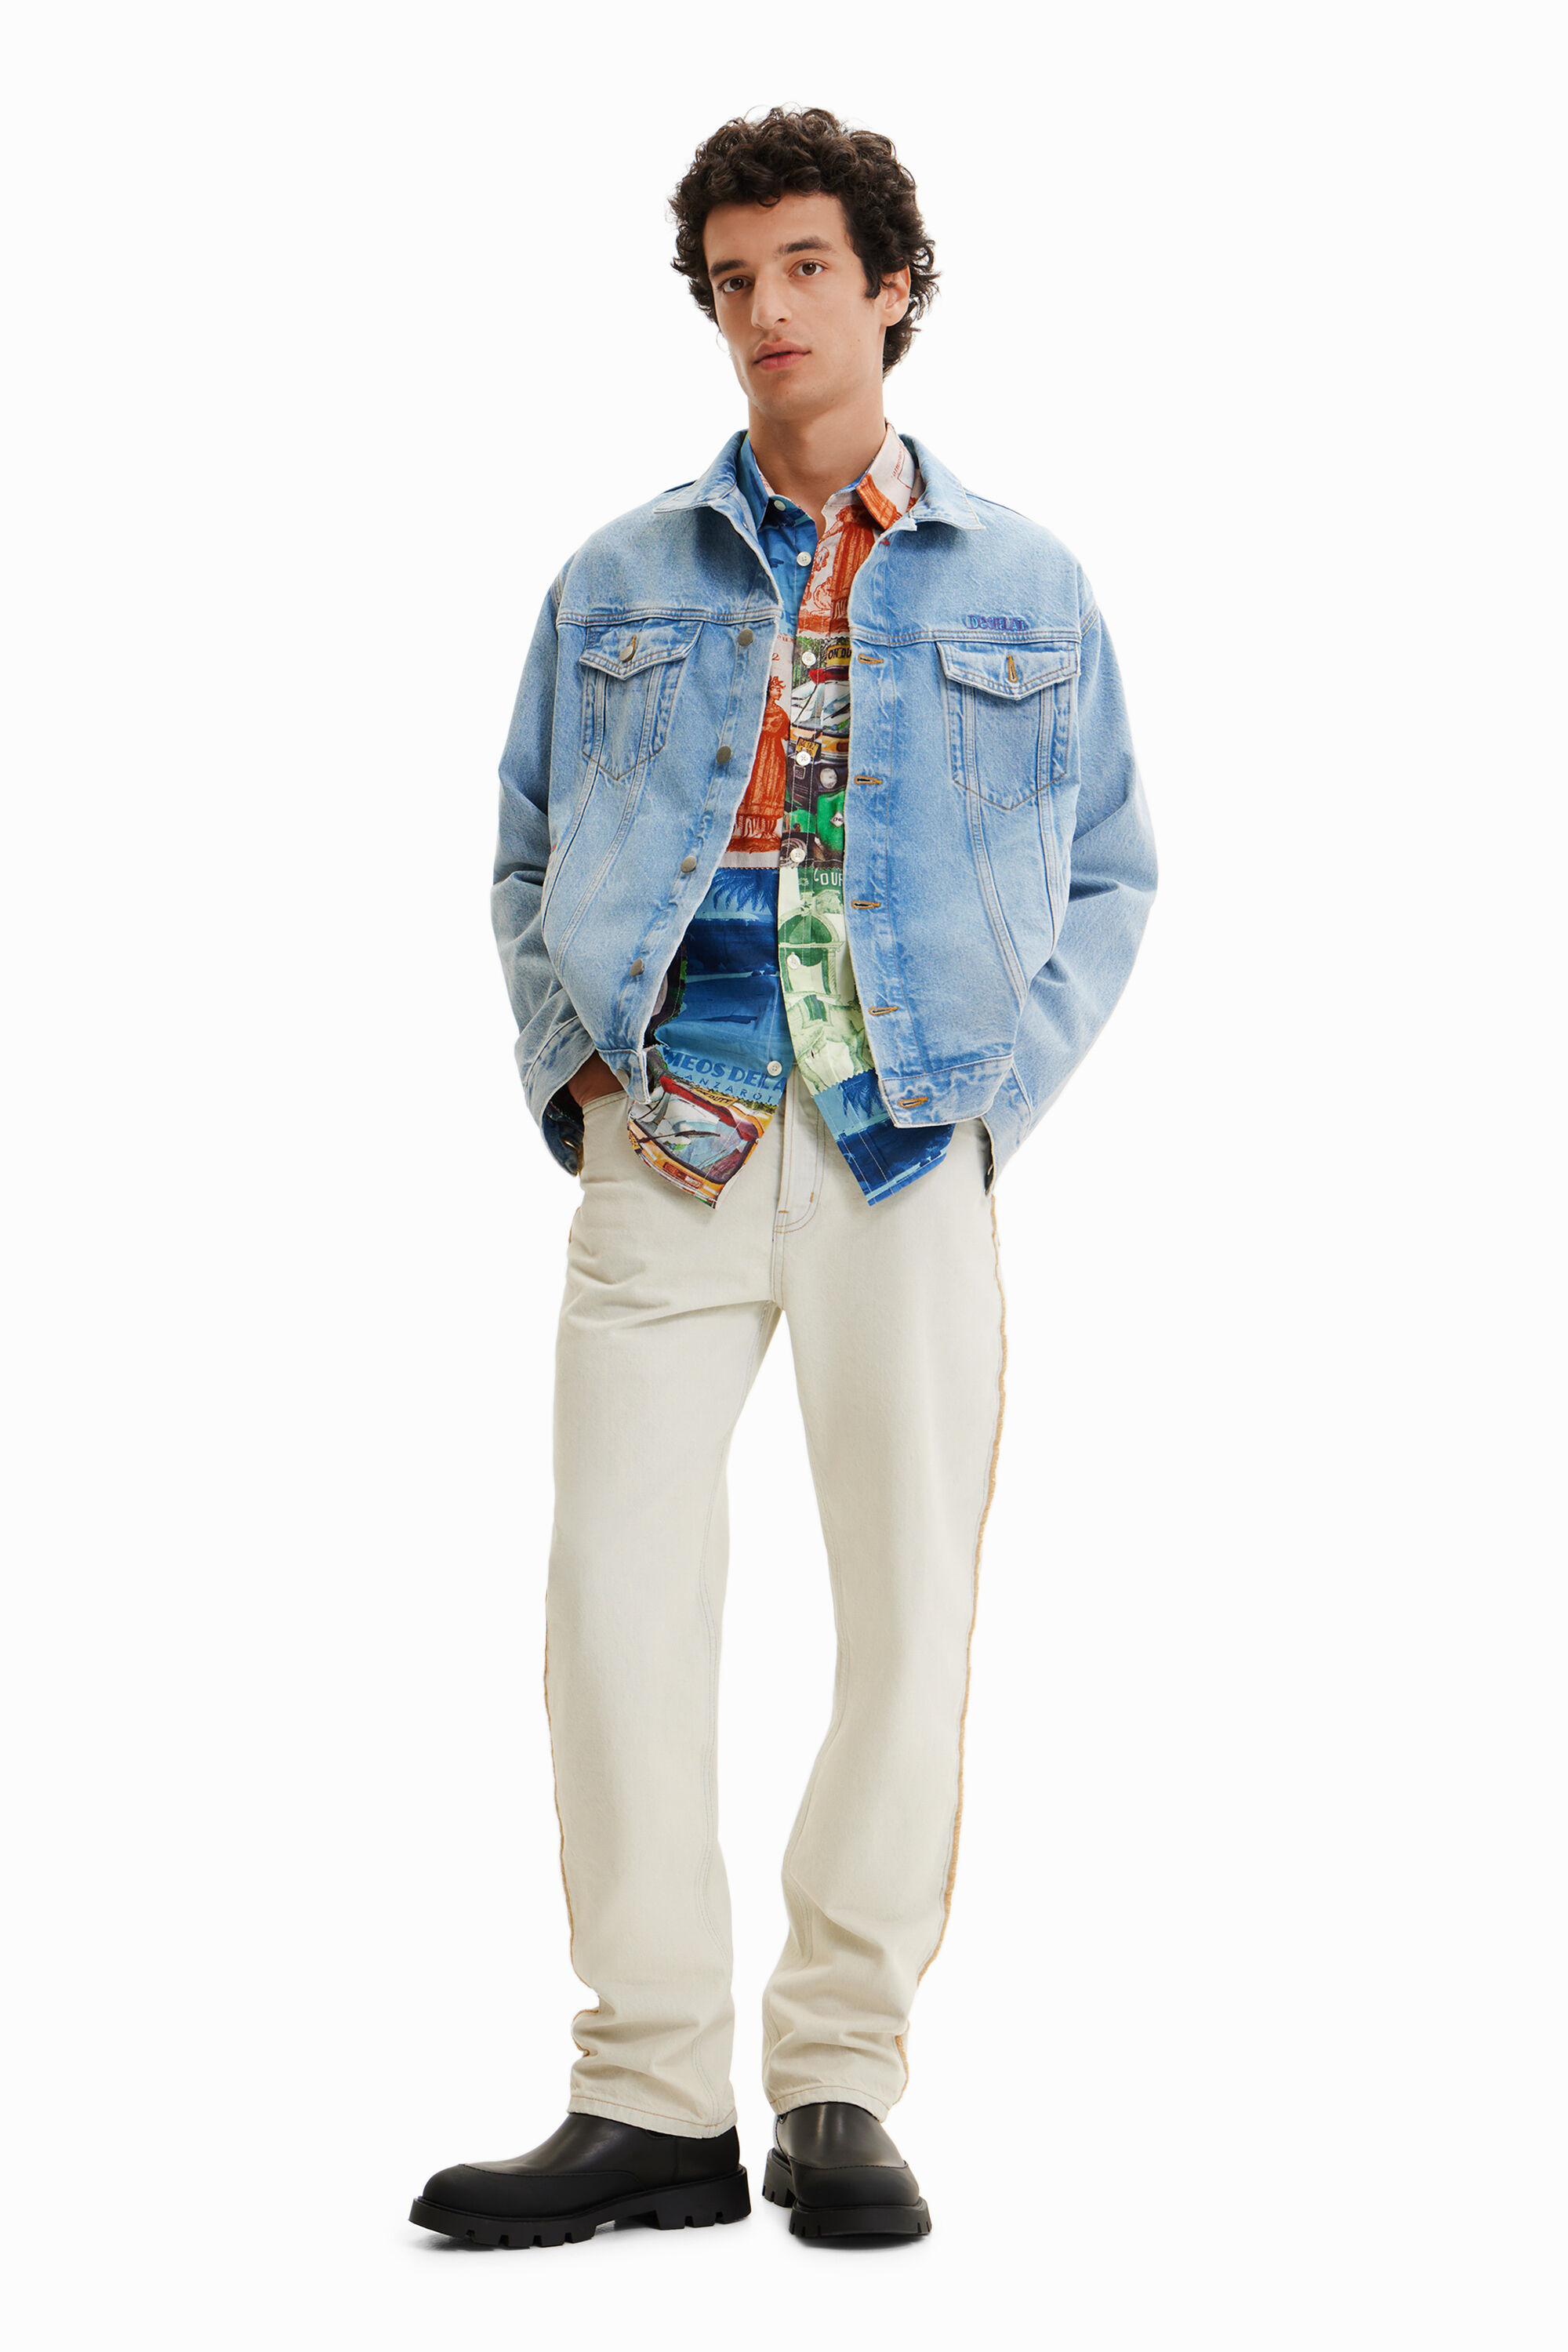 Desigual men's embroidered denim jacket Summer 2023 collection at Angel in Vancouver Canada